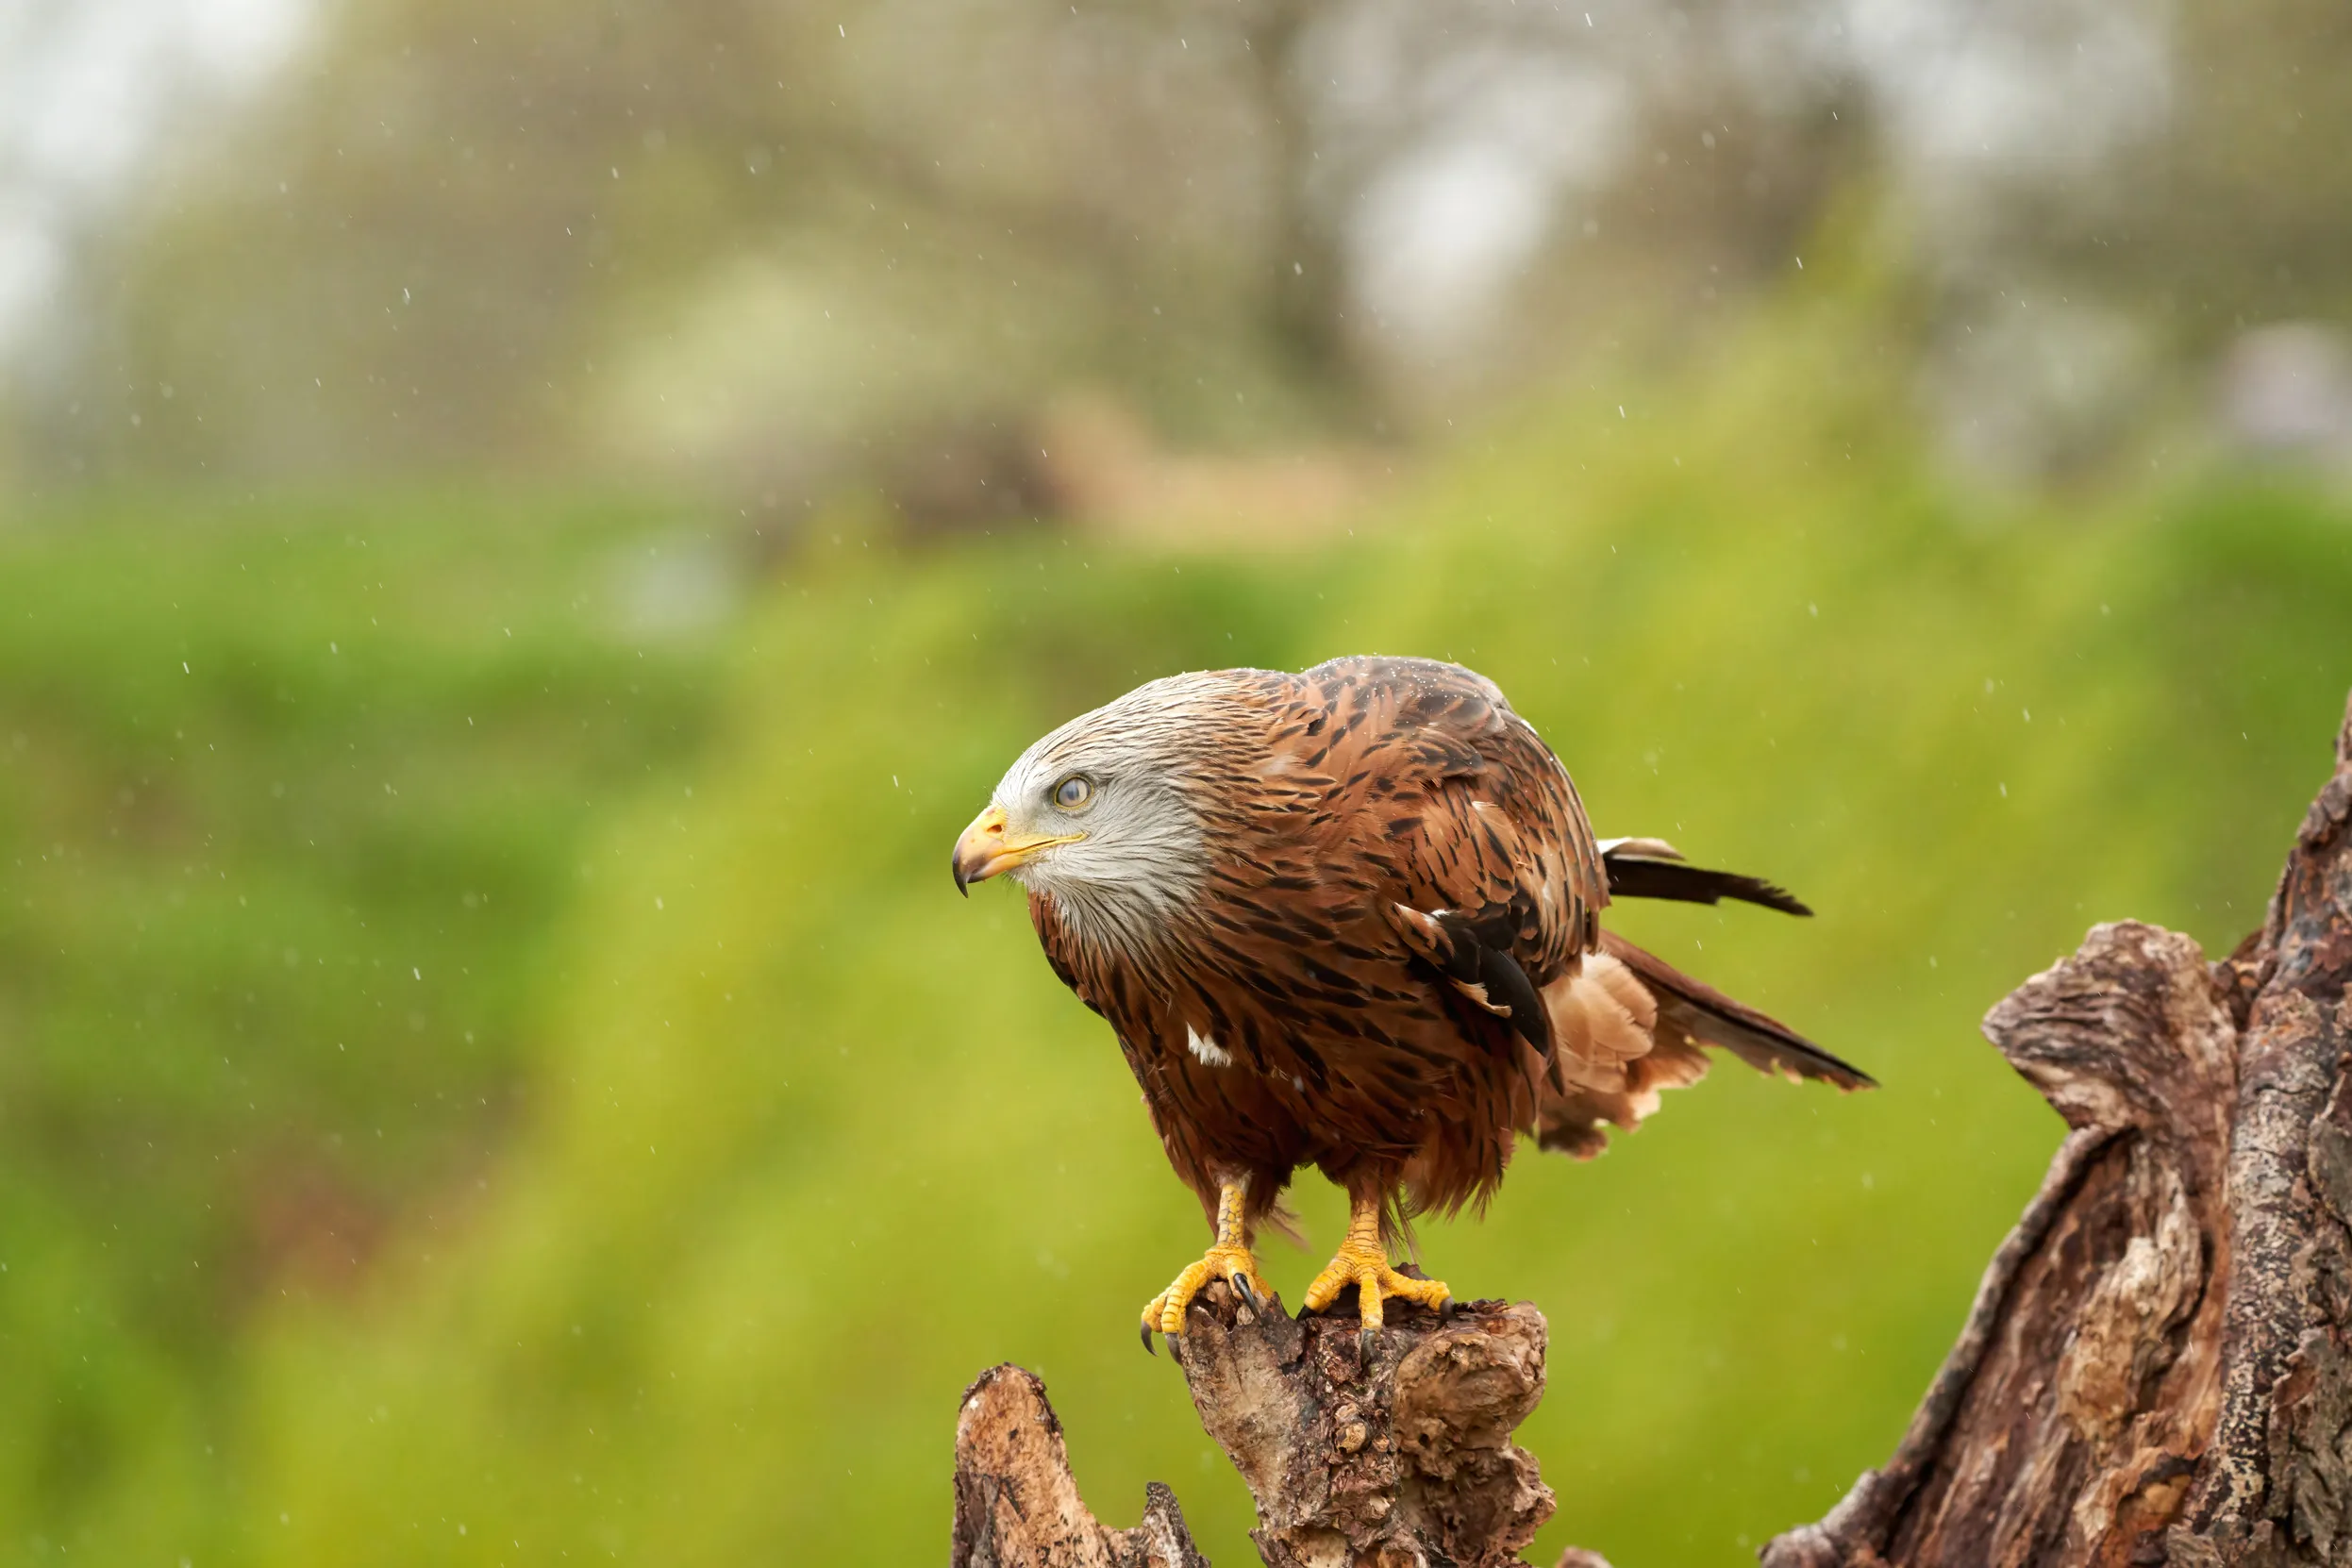 A lone Red Kite perched on a stump, viewed from the side in the rain.